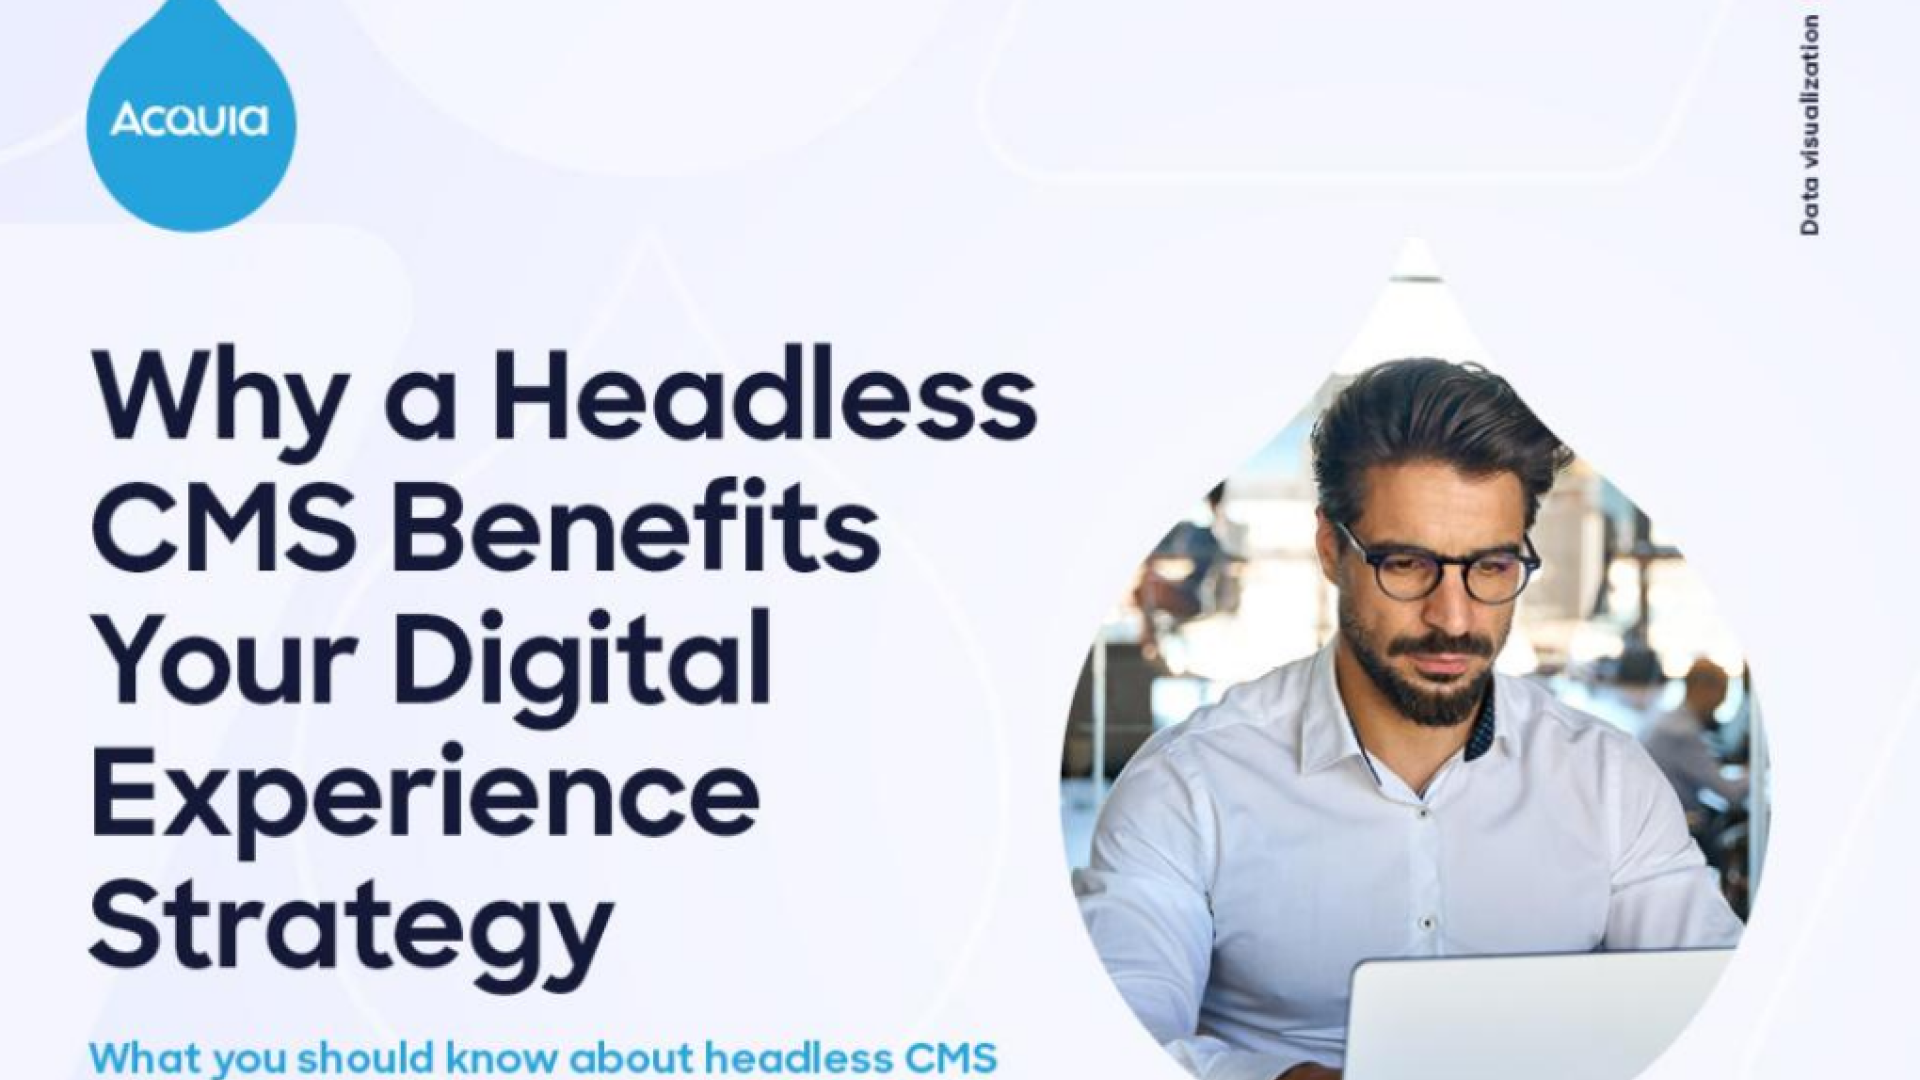 Why a Headless CMS Benefits Your Digital Experience Strategy